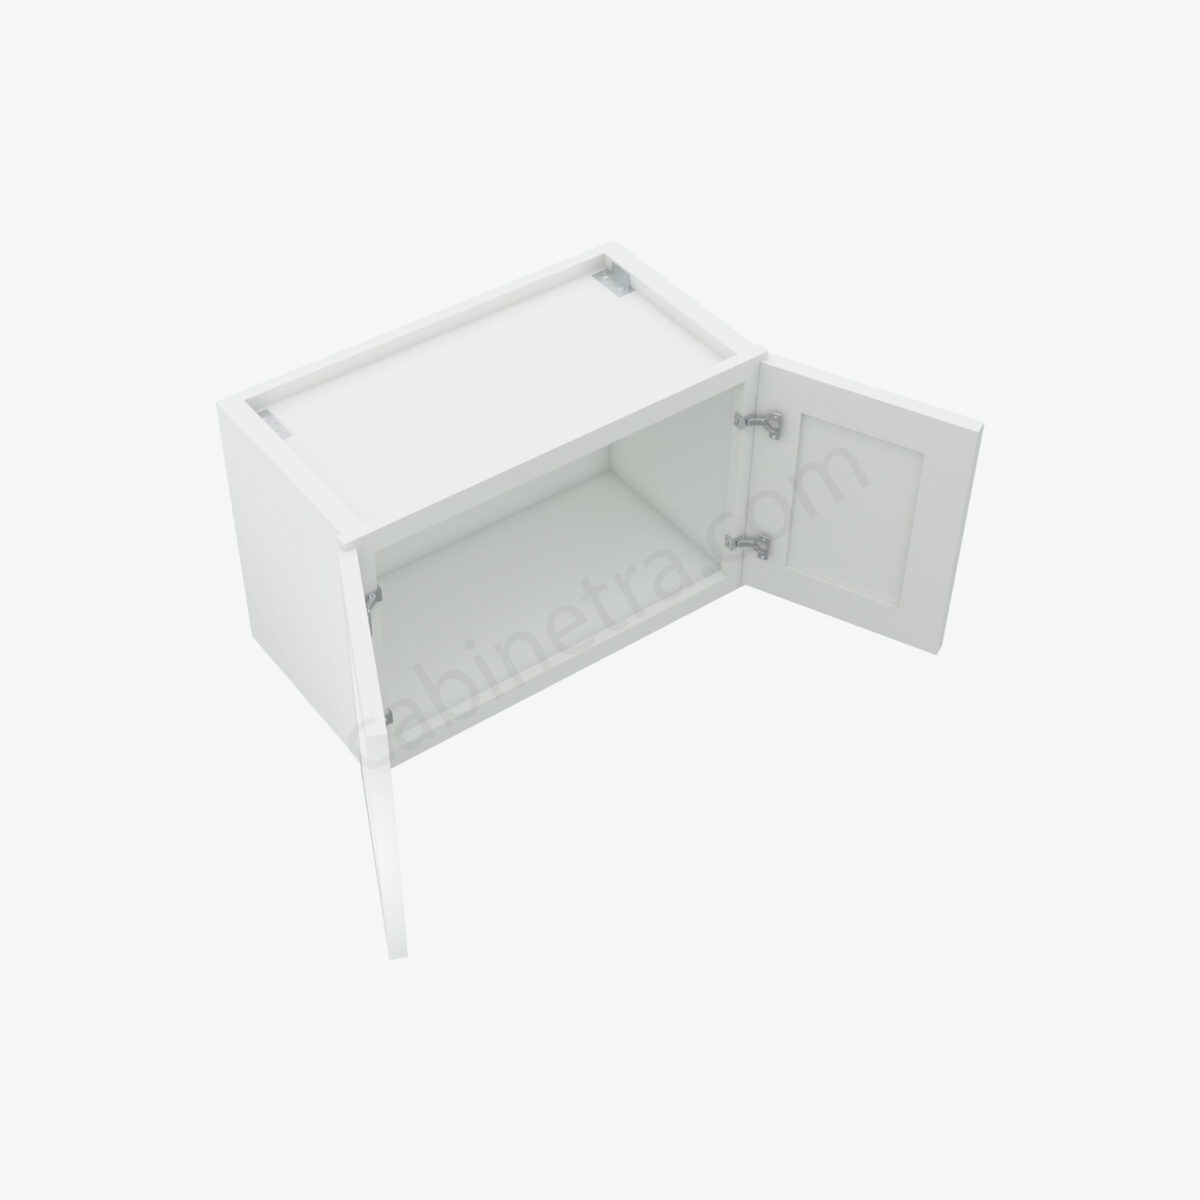 TW W2415B 2 Forevermark Uptown White Cabinetra scaled